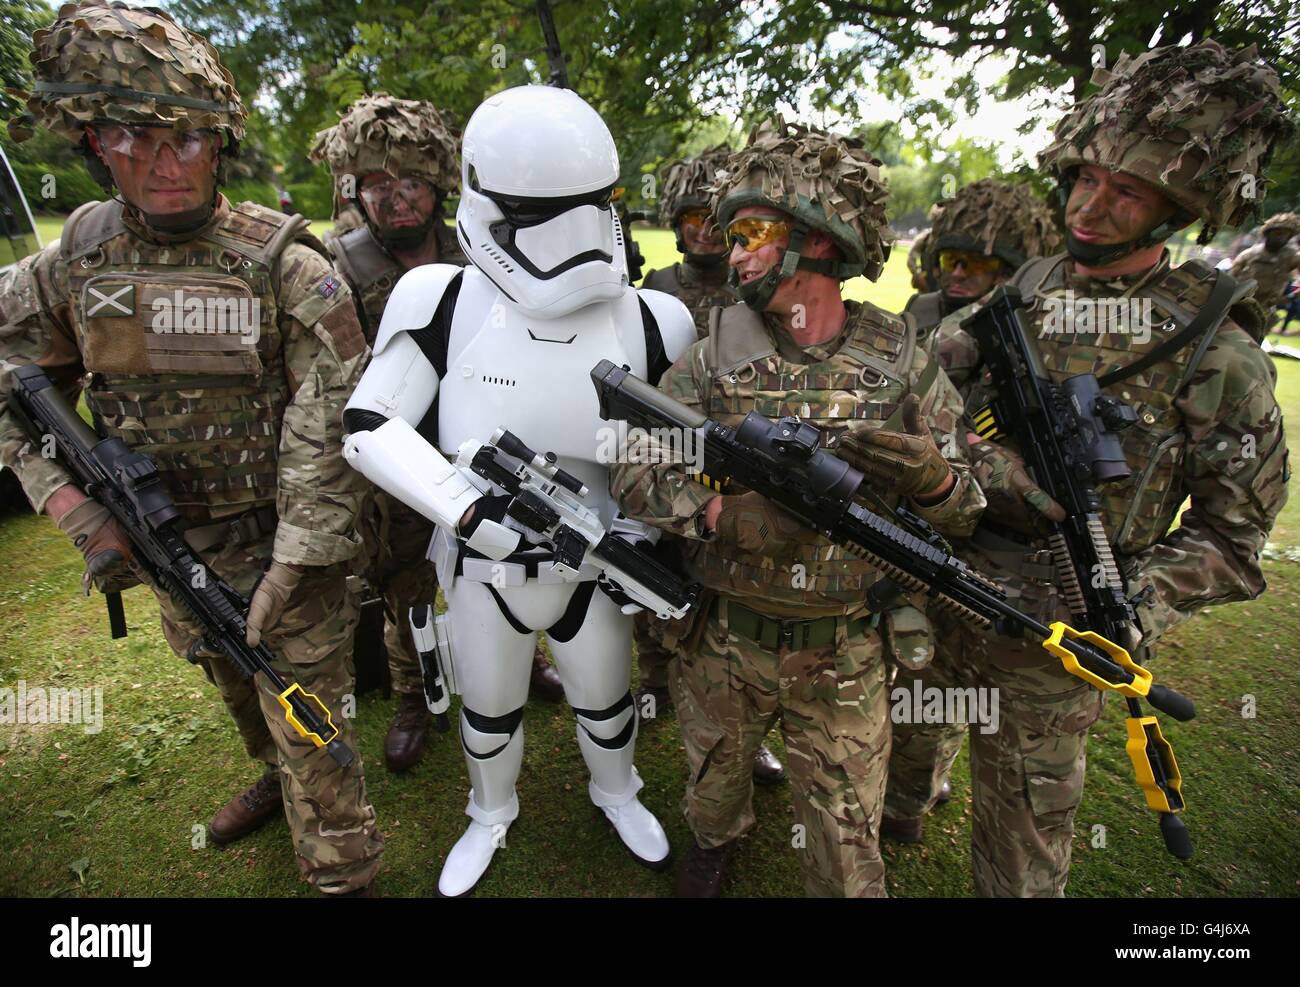 A stormtrooper discusses weaponry with soldiers from 7 SCOTS Royal Regiment of Scotland during the Stirling Military Show at Kings Park, Stirling. Stock Photo